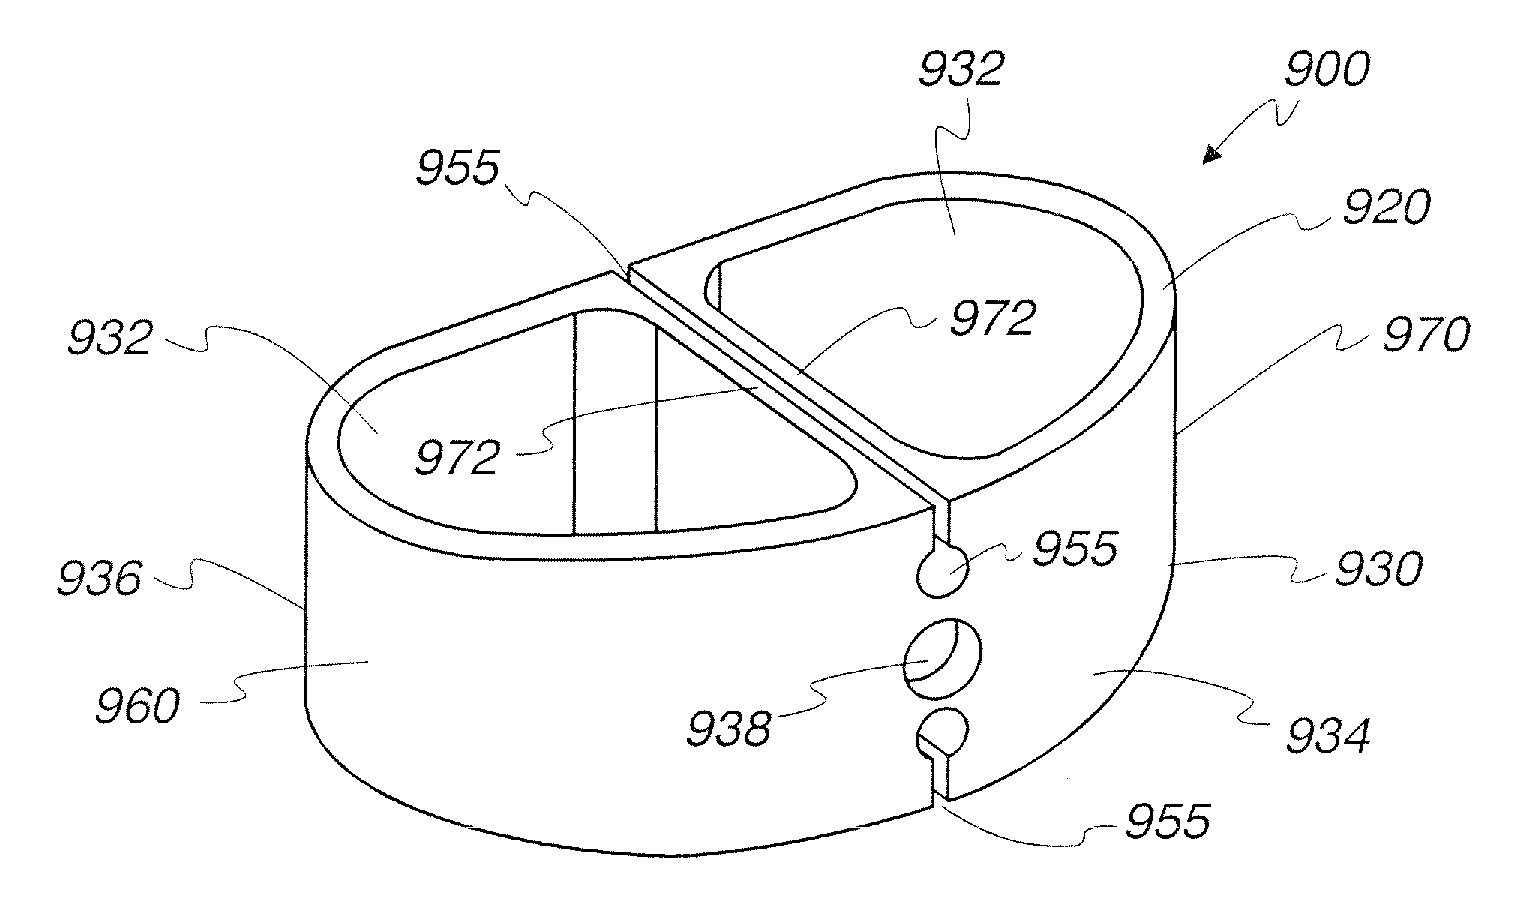 Apparatus and method for stabilizing adjacent bone portions